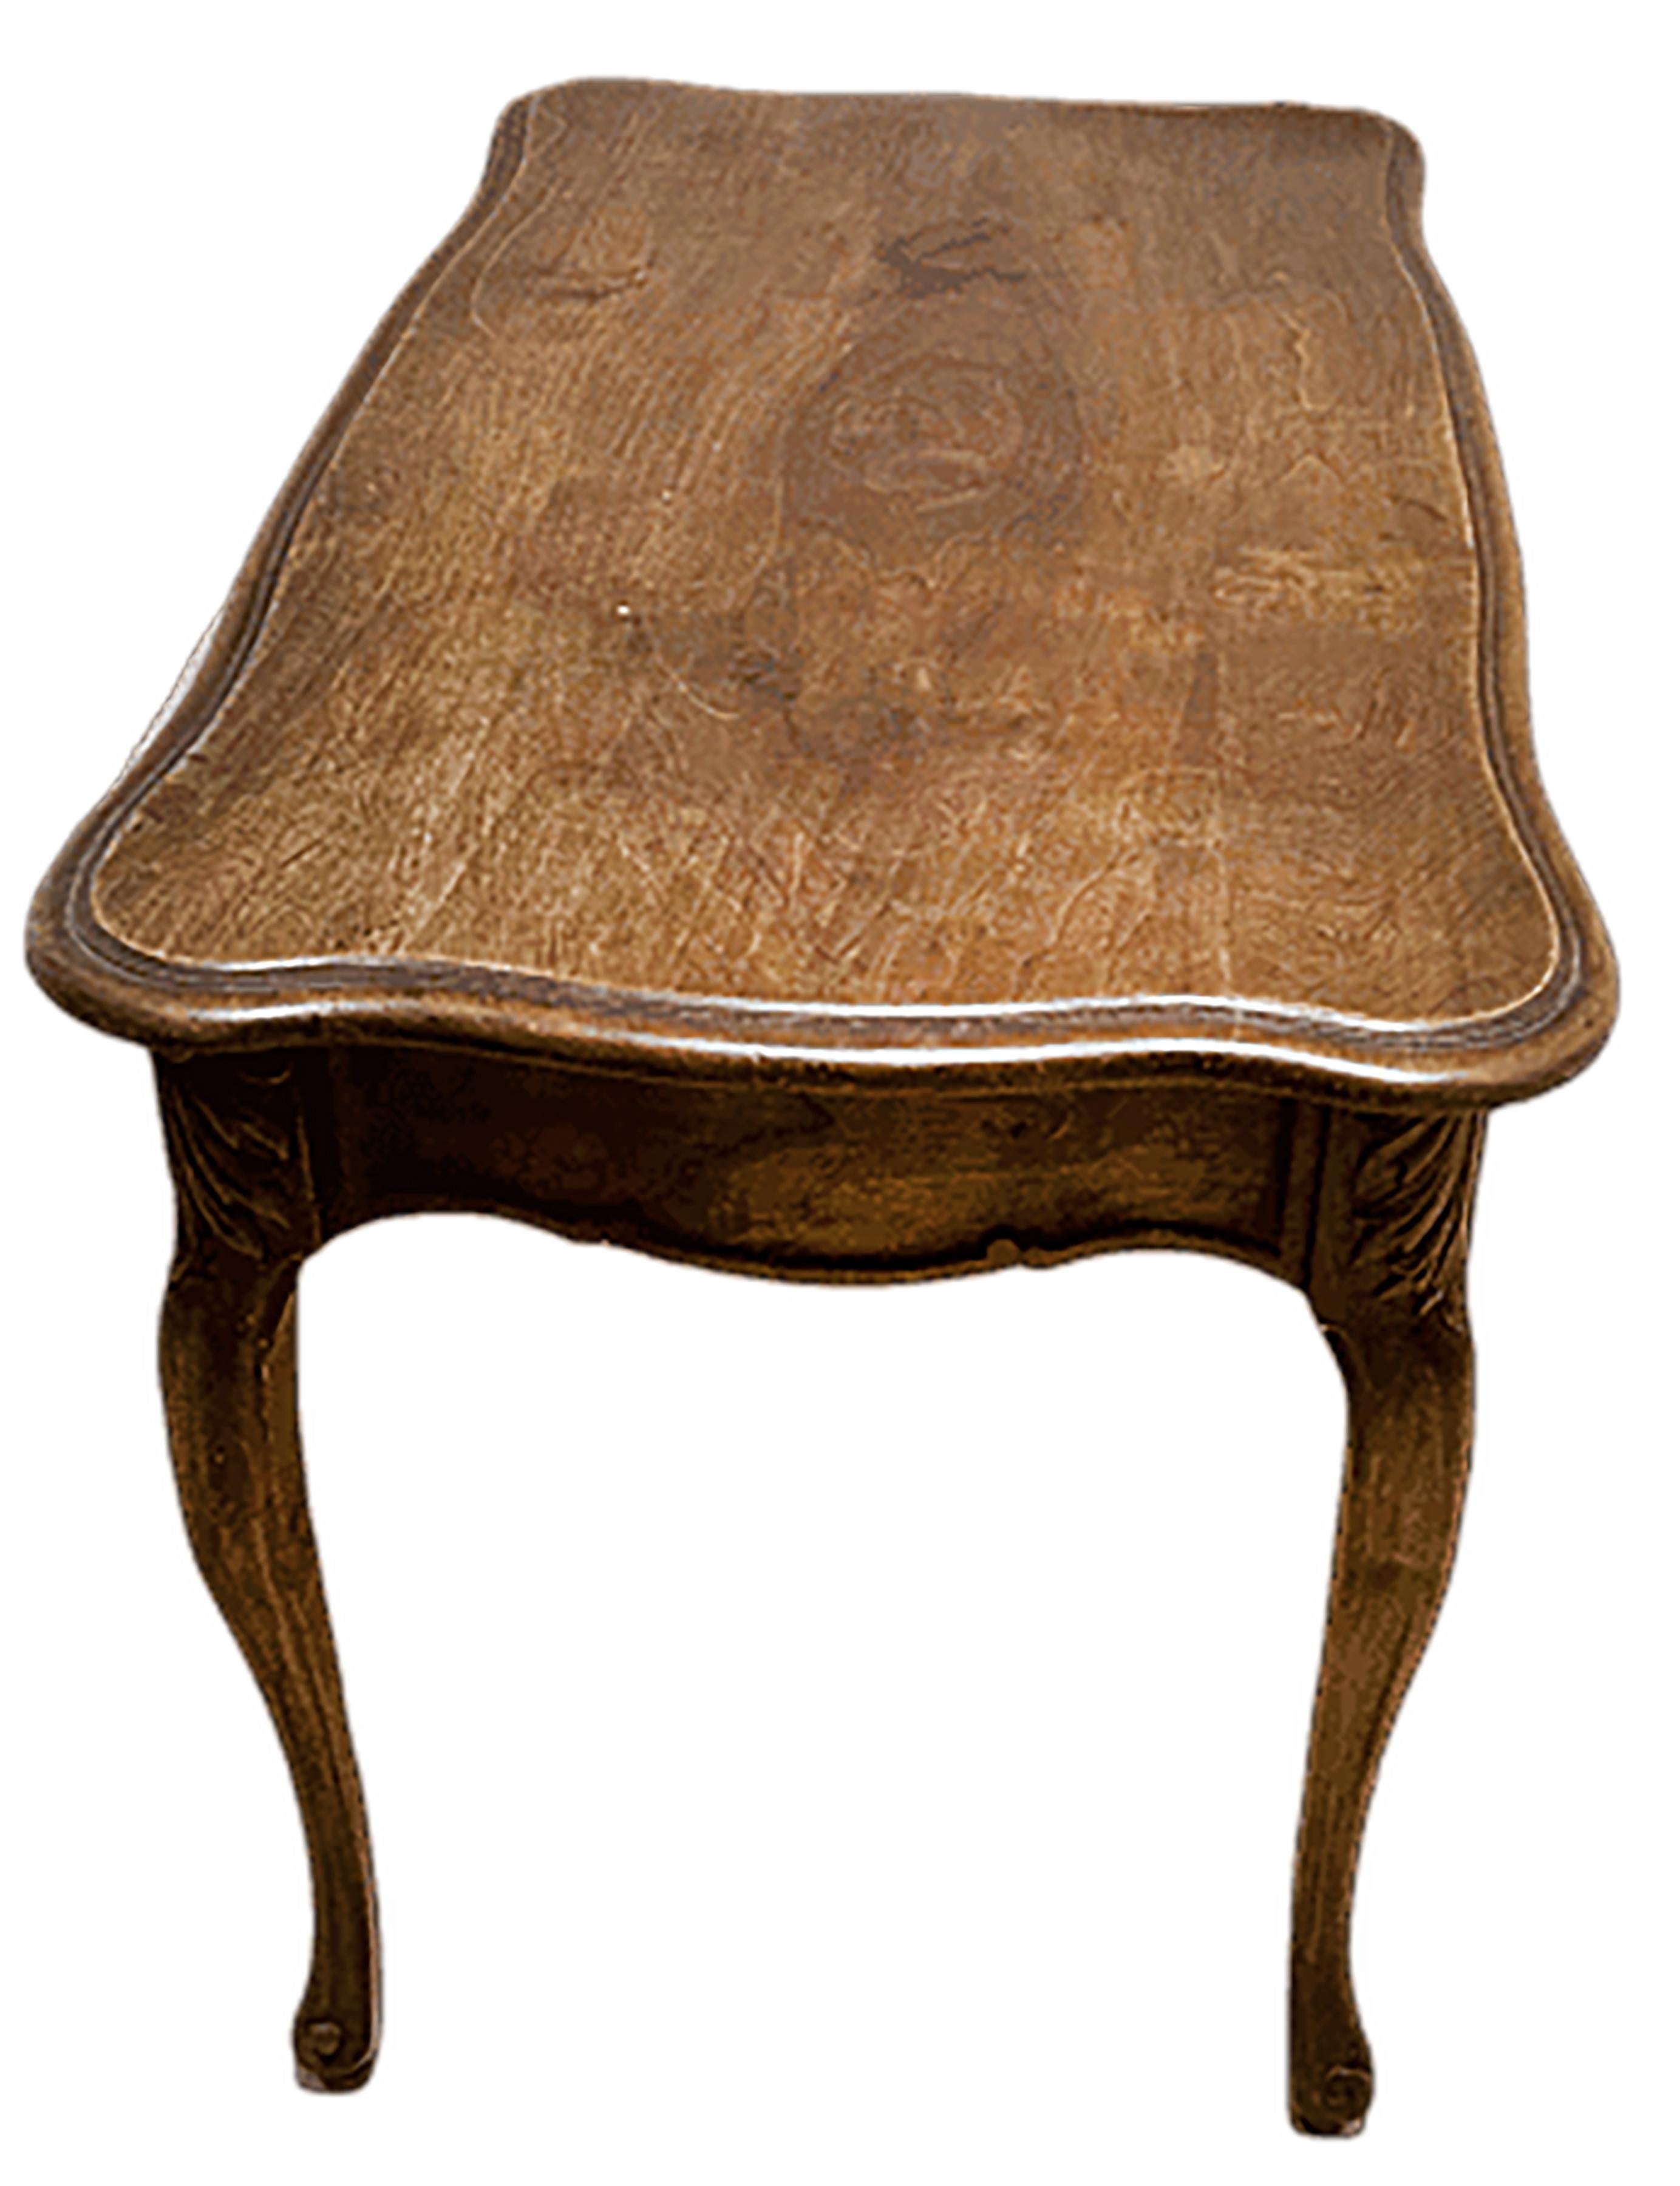 An elegantly simple 19th century French occasional table in the Louis XV style. Hand made with solid wood. Walnut brown finish. The front has a small pullout drawer with a brass handle.

In good condition. Some gentle wear consistent with age and